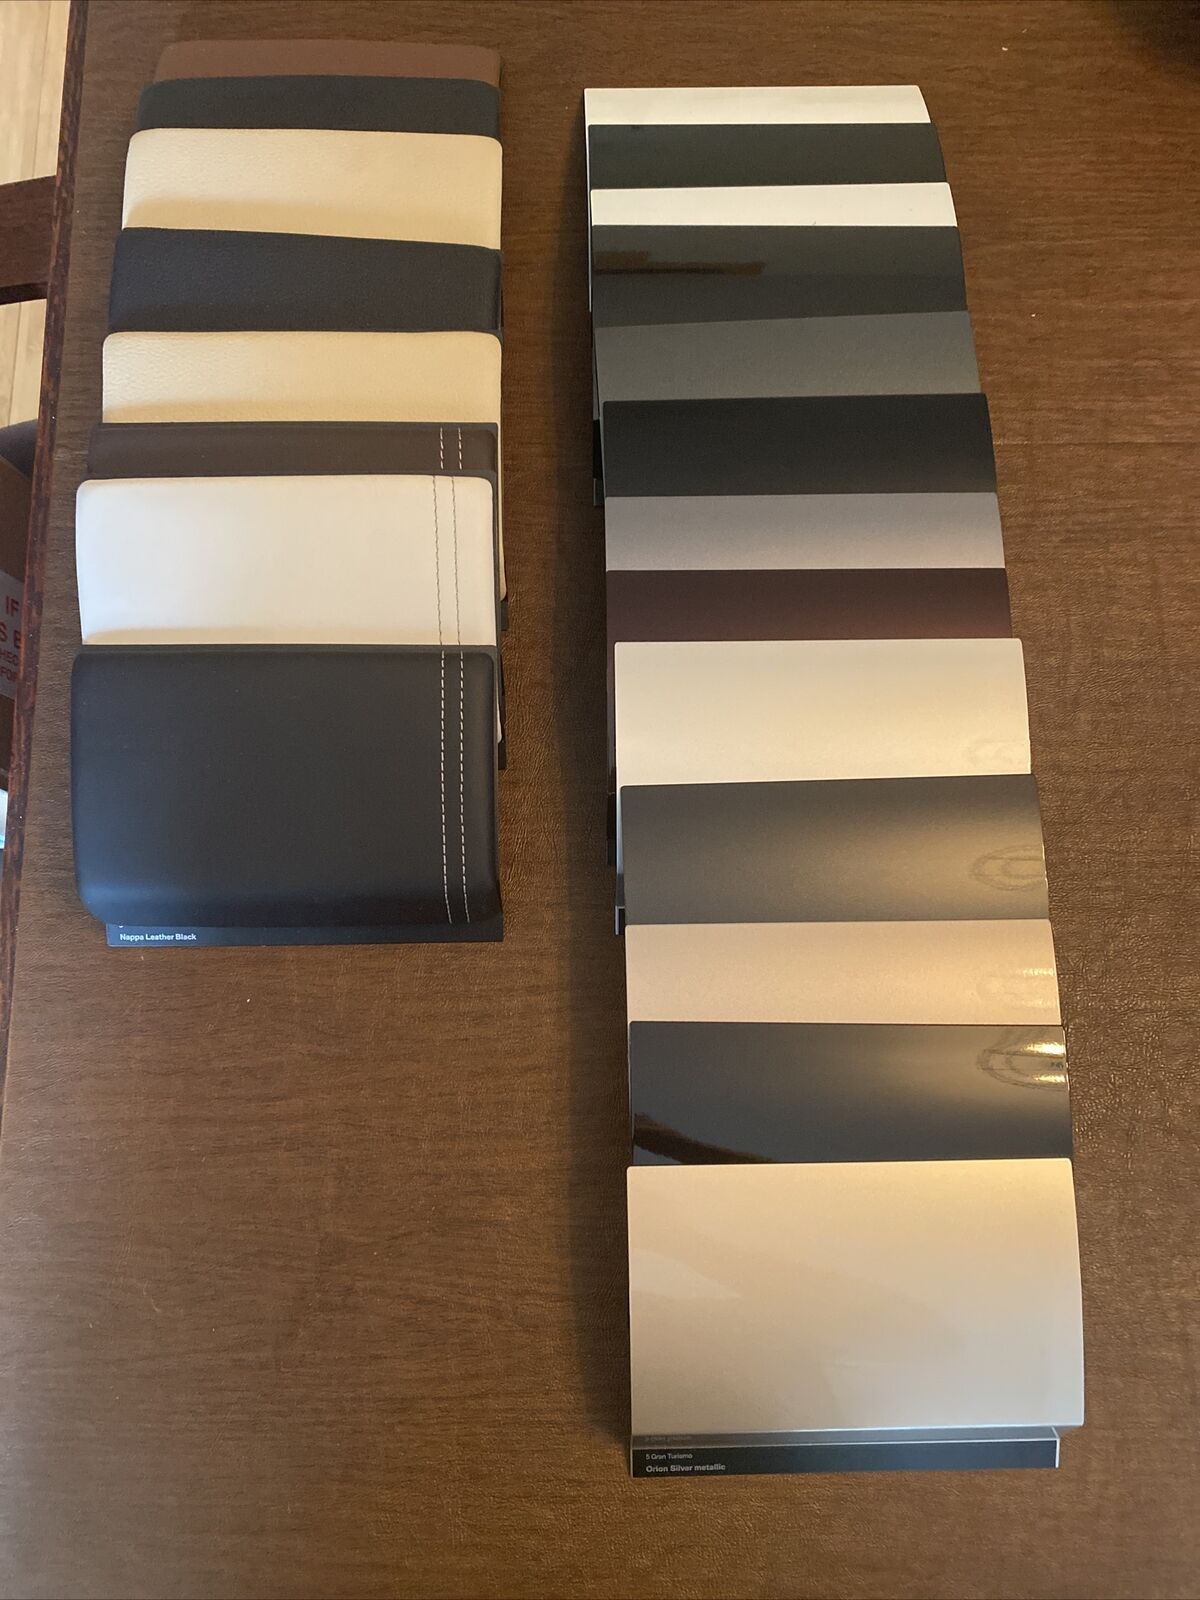 BMW 5 Series Dealer Build Swatches (Leather/Paint)